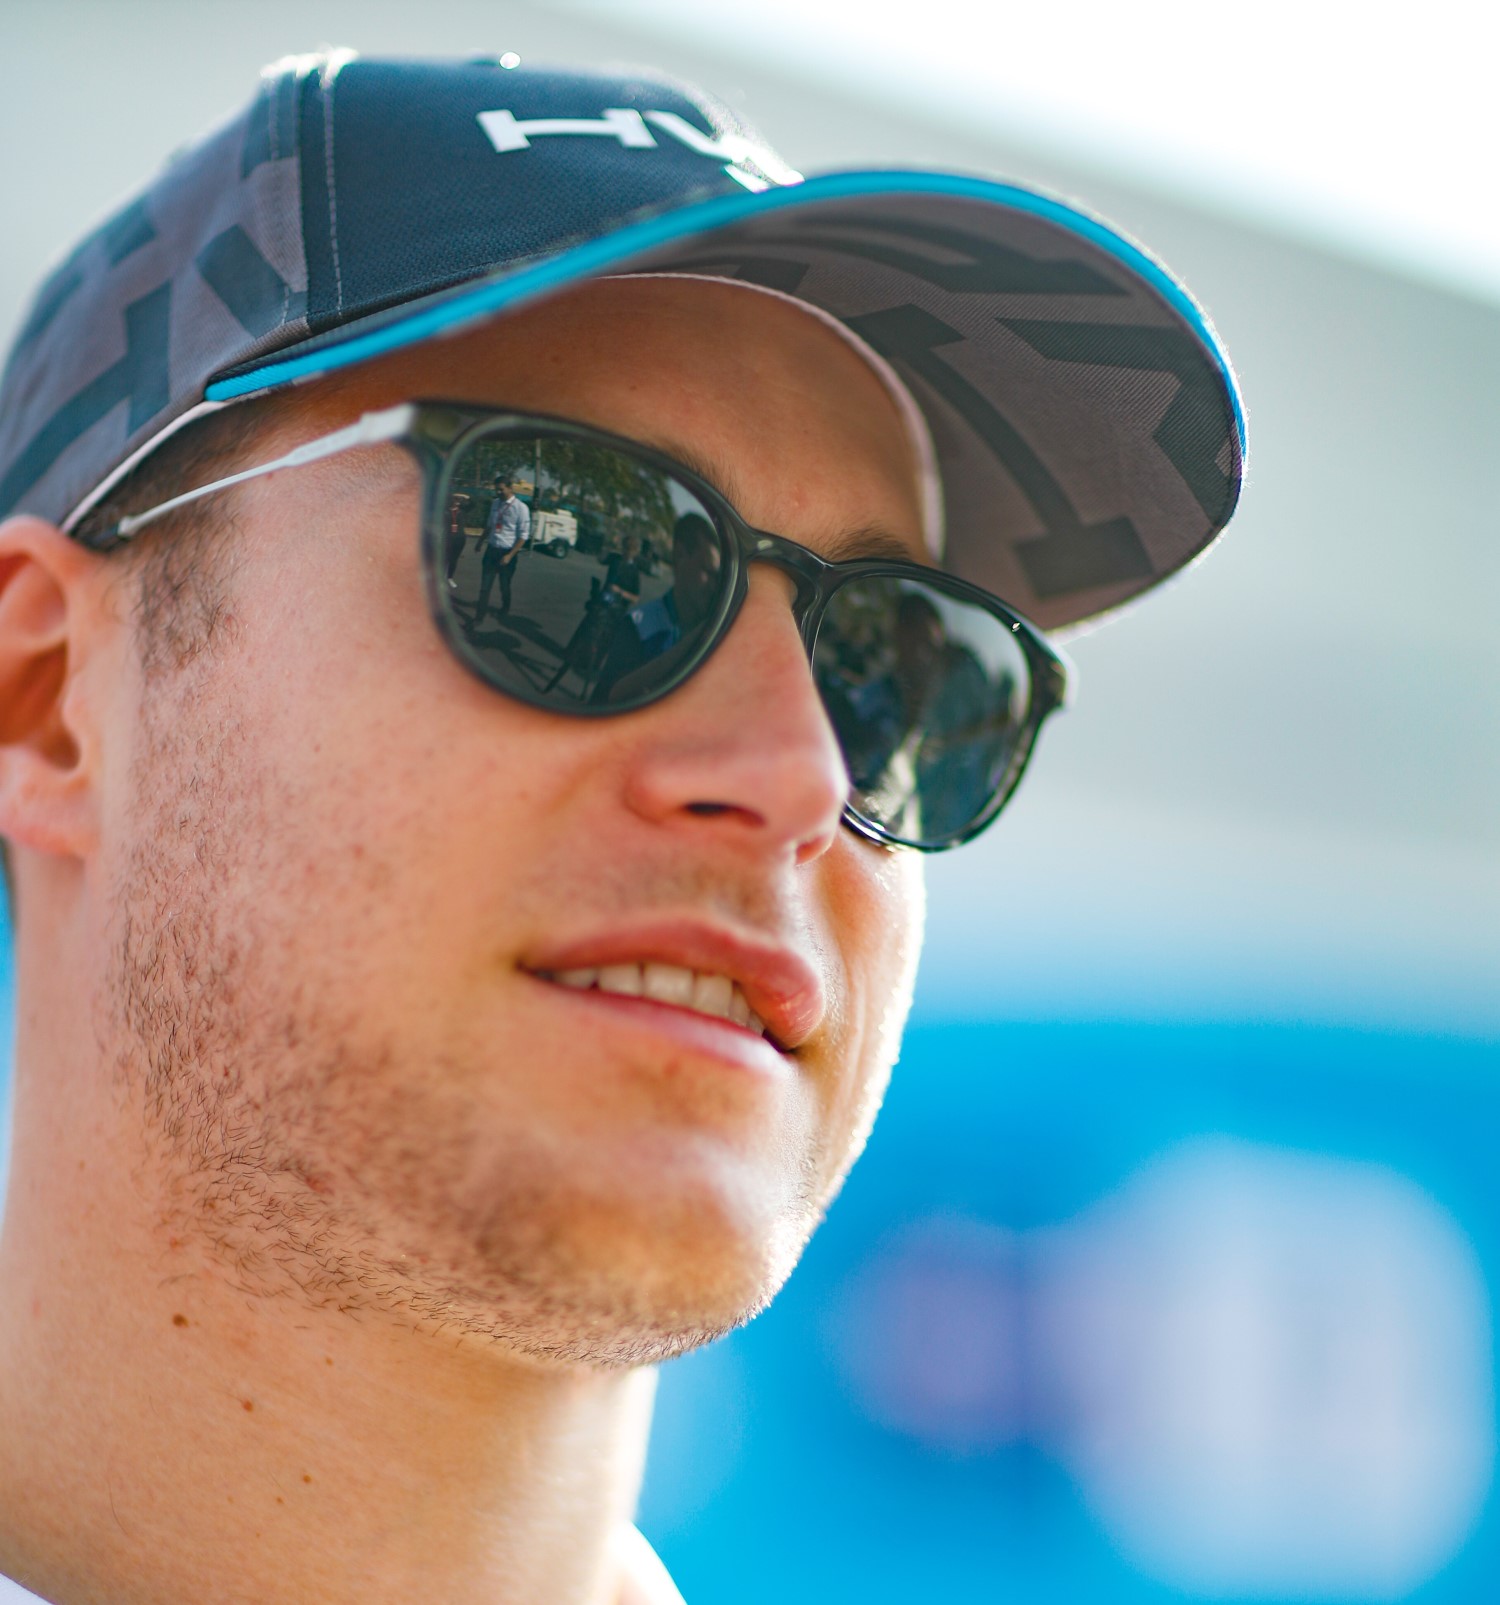 F1 reject Vandoorne fits right in with the other F1 rejects in Formula E